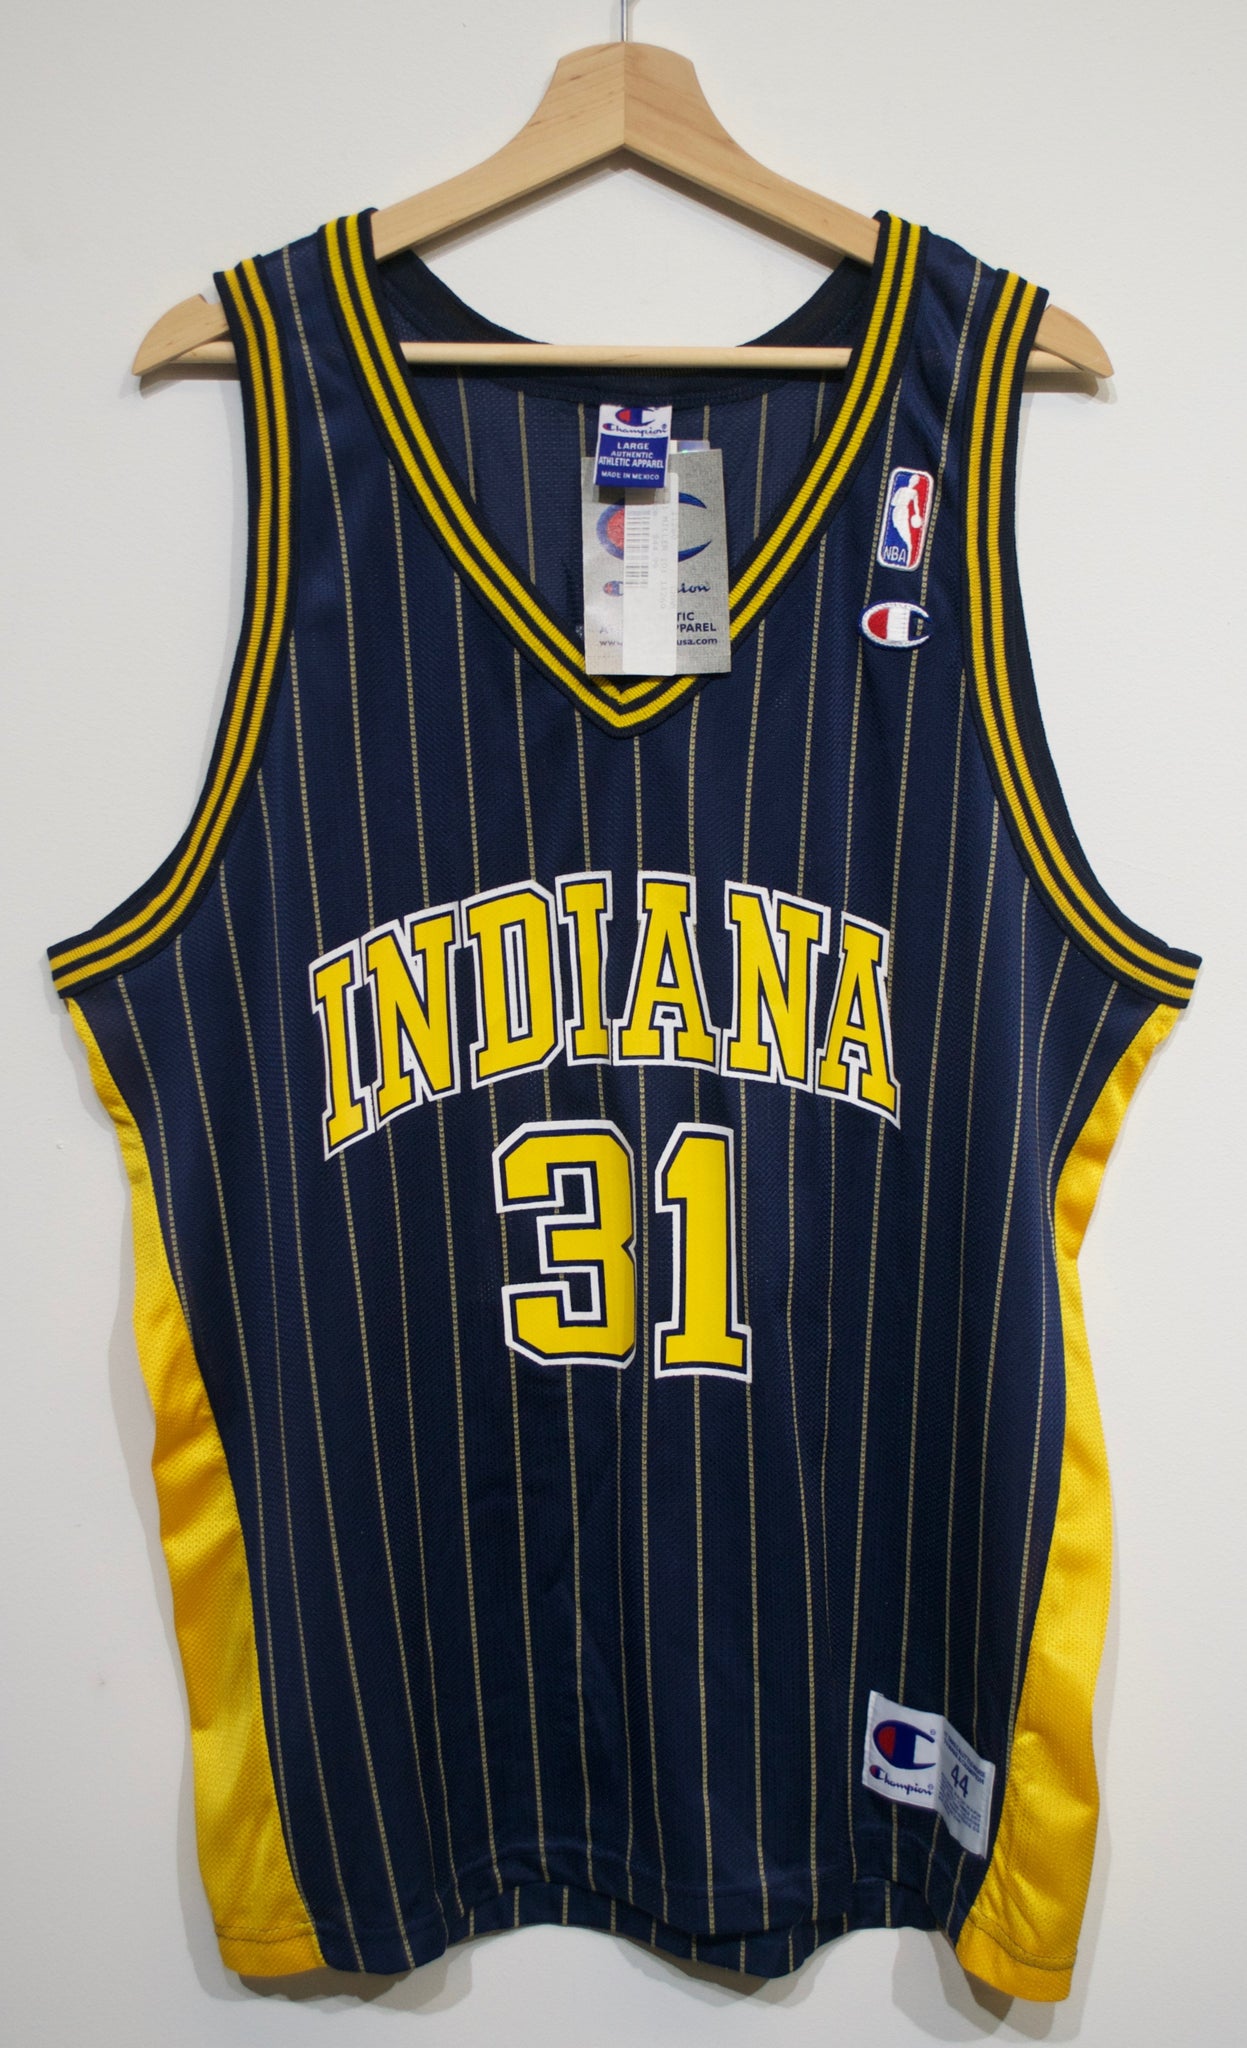 Reggie Miller Indiana Pacers Throwback Basketball Jersey